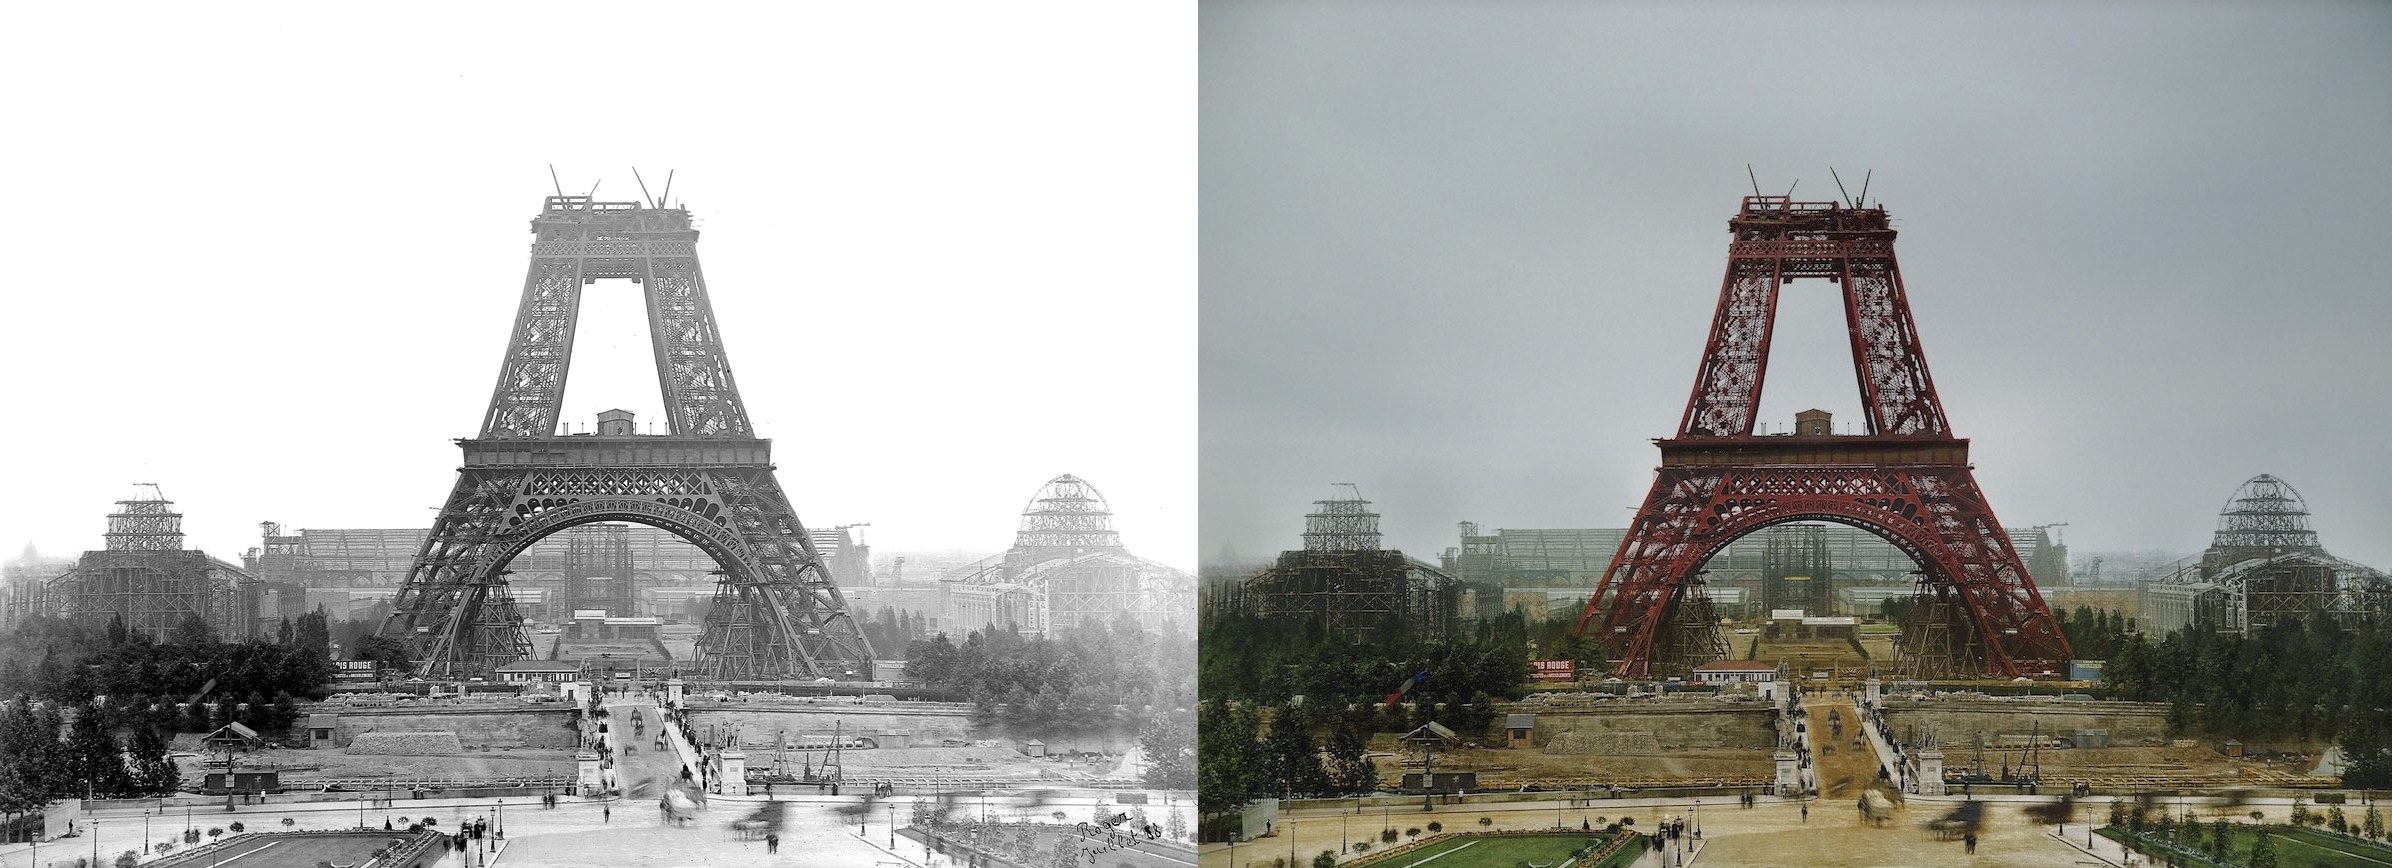 Building the Eiffel Tower in Paris, France in 1888.